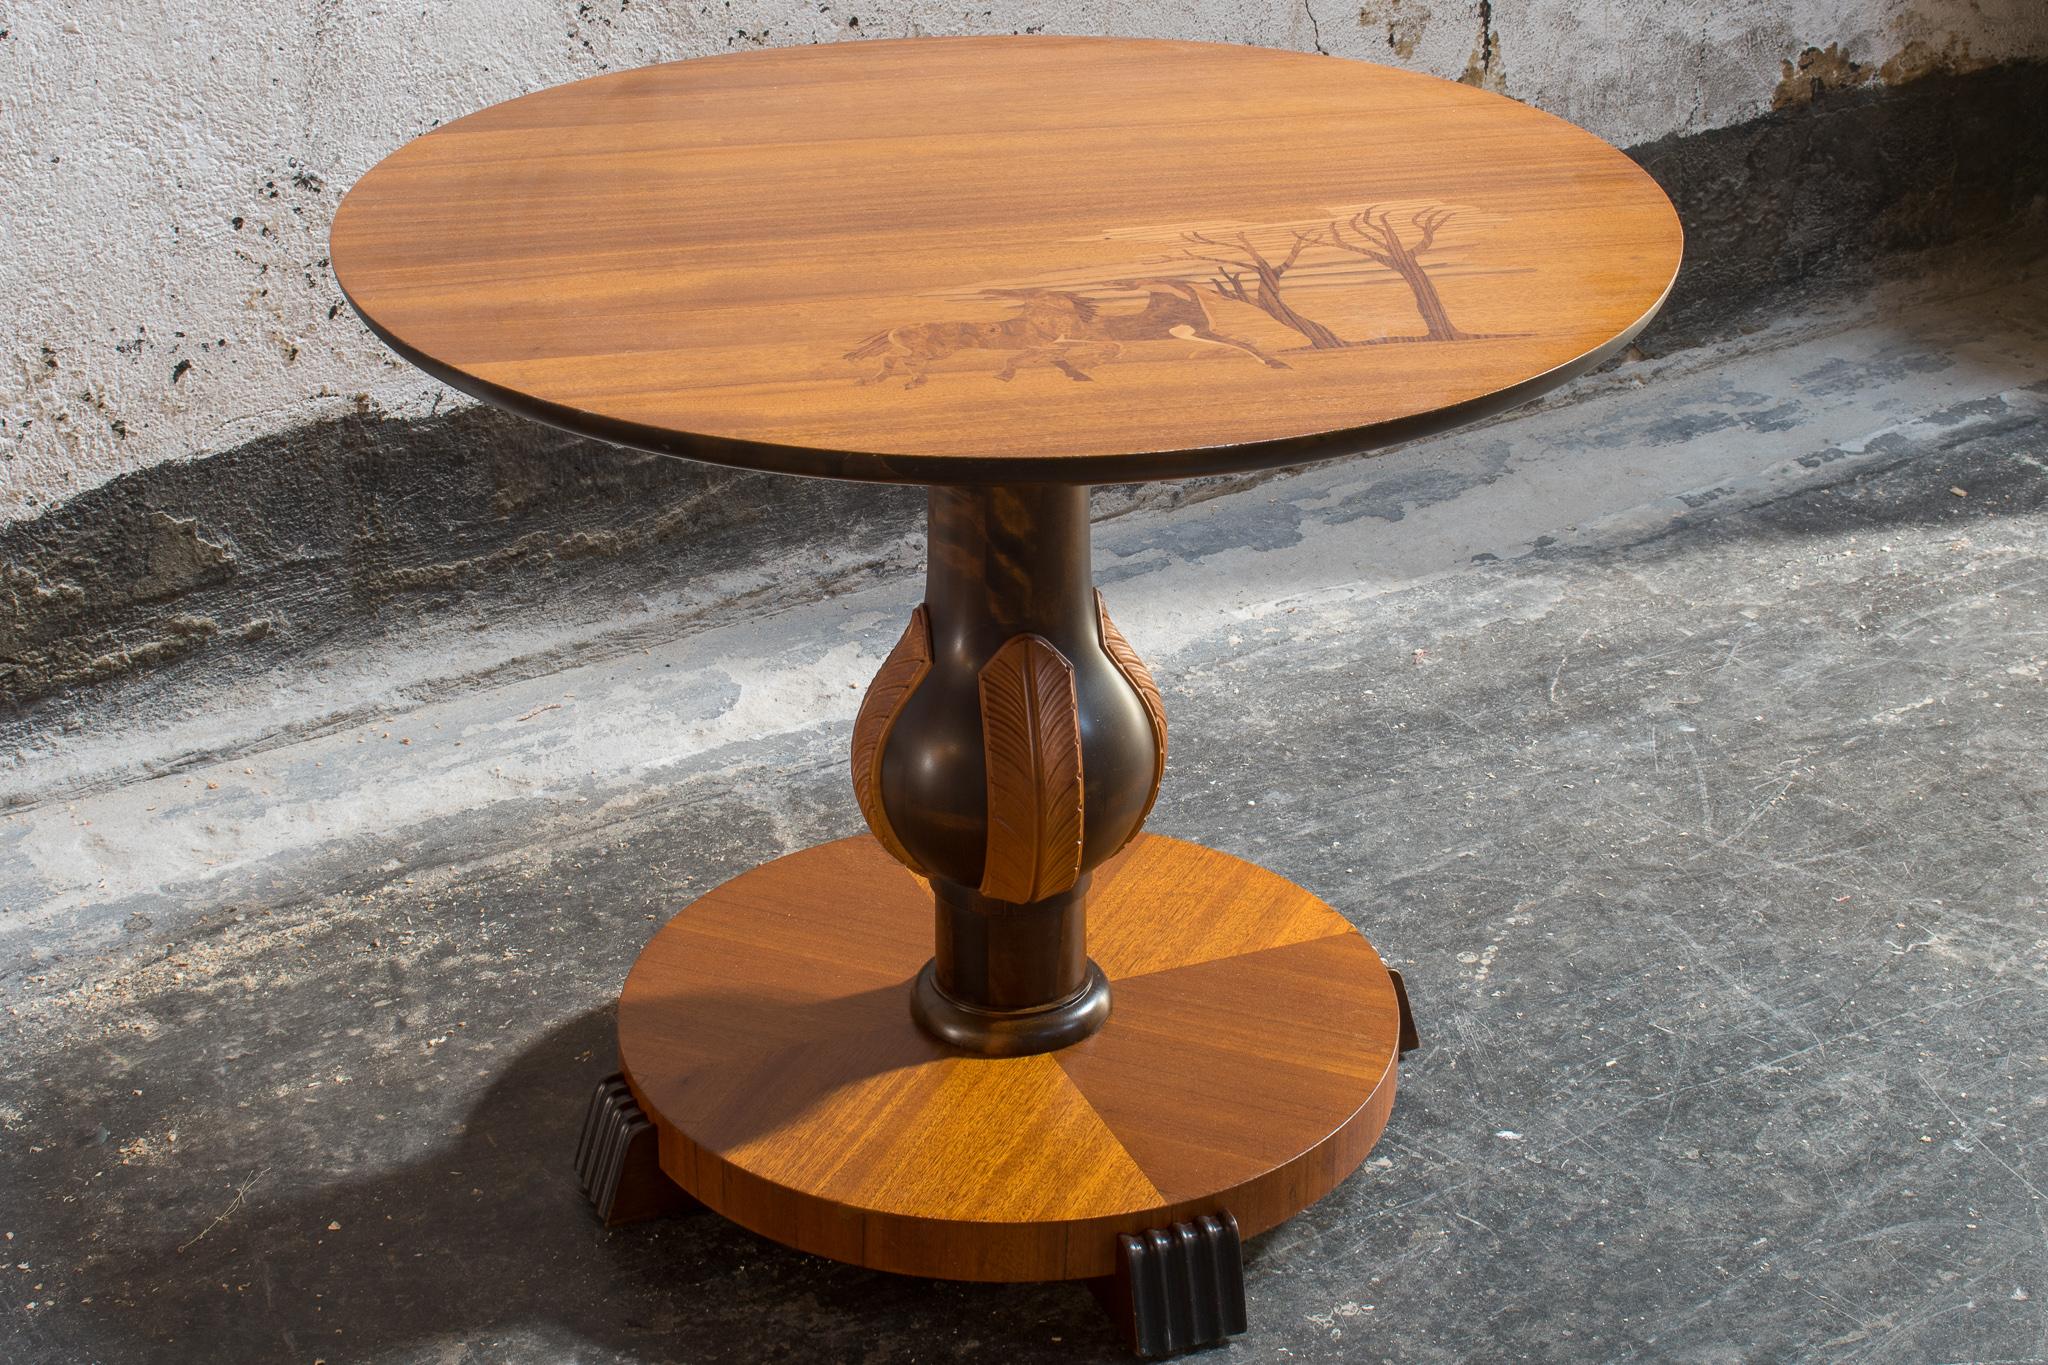 Round end table or side table in the Swedish Art Deco style. Pedestal table was made in Sweden, circa 1930. Mahogany table top features beautiful intarsia inlay depicting two horses and trees in Jacaranda, Elm and Burled Birch. Tabletop sits on